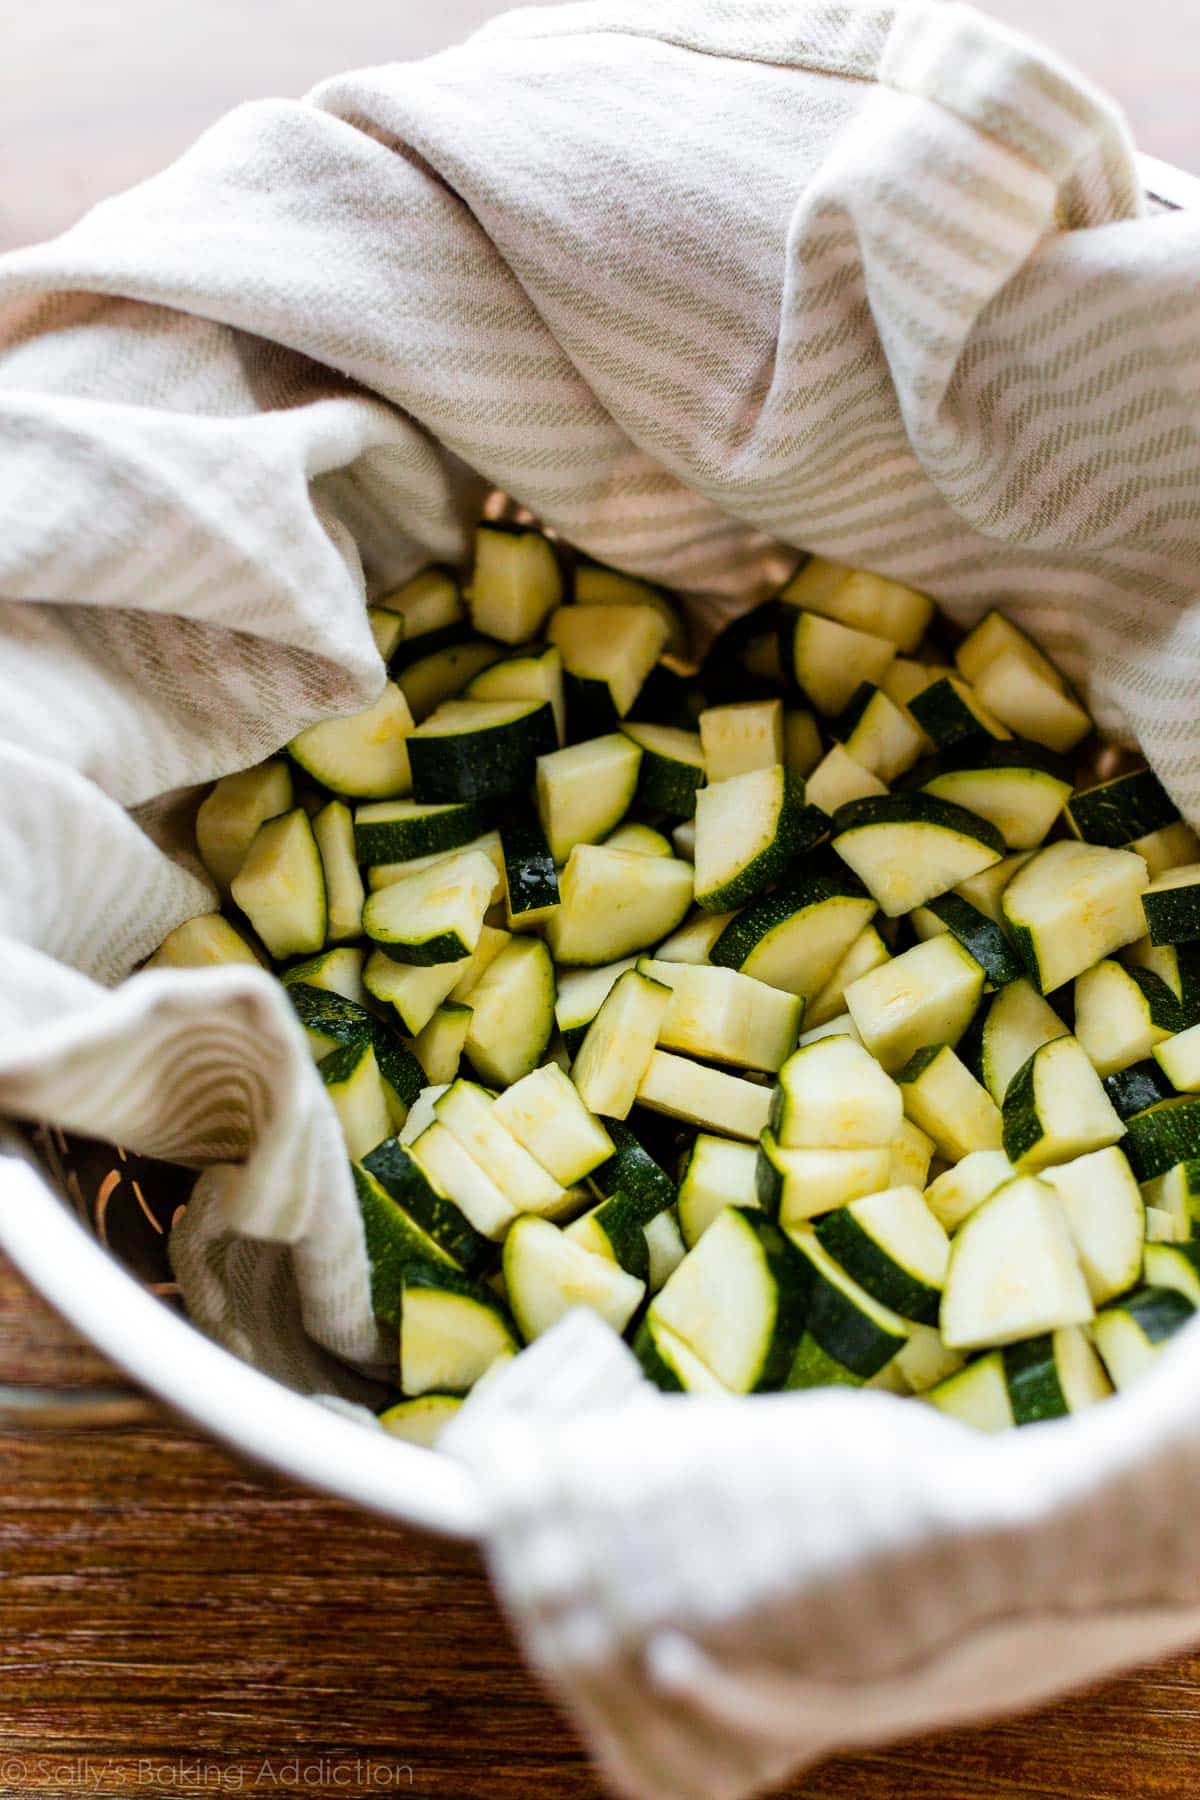 Chopped zucchini in a colander lined with a towel